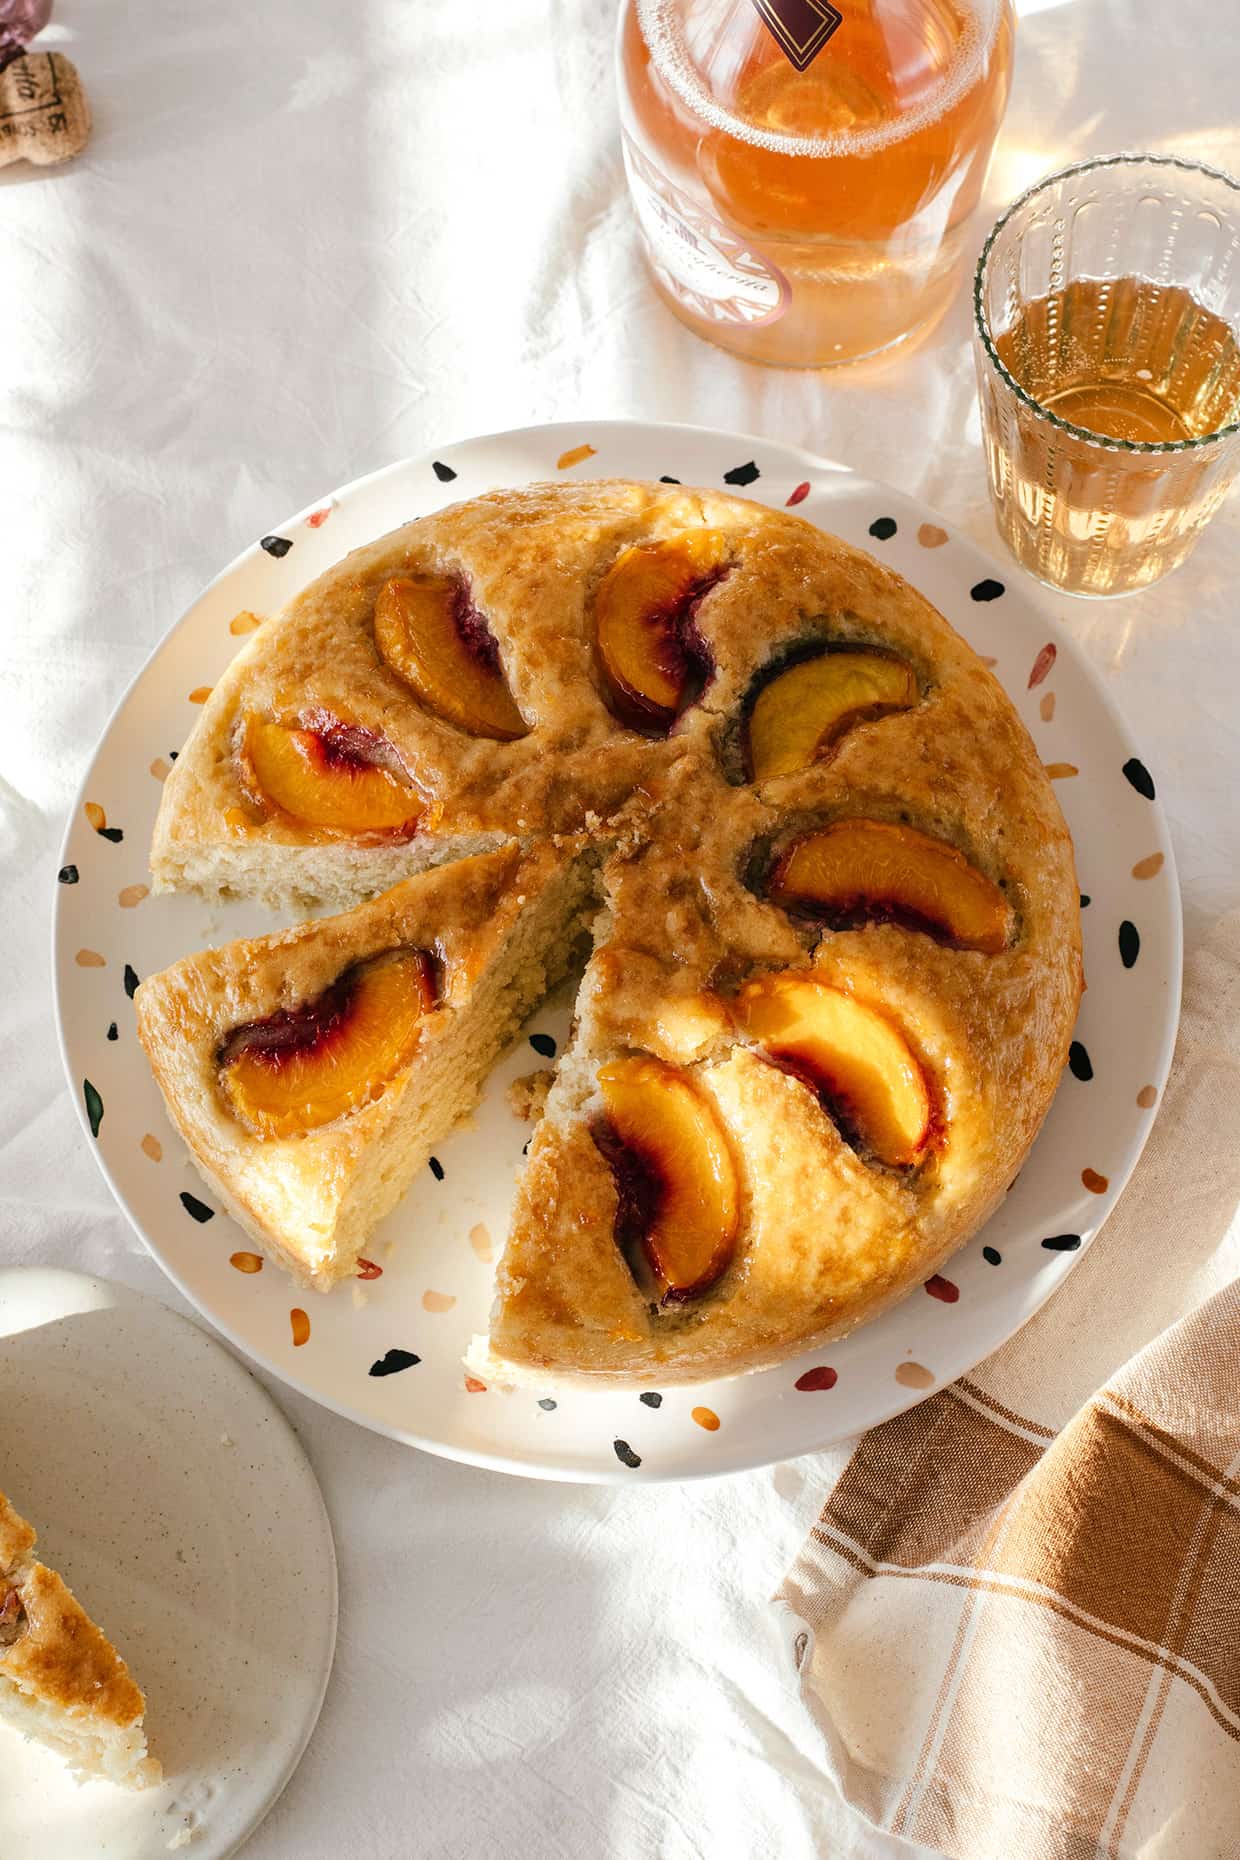 a plate with single layer peach cake, sliced, with a bottle of wine and glasses on the side